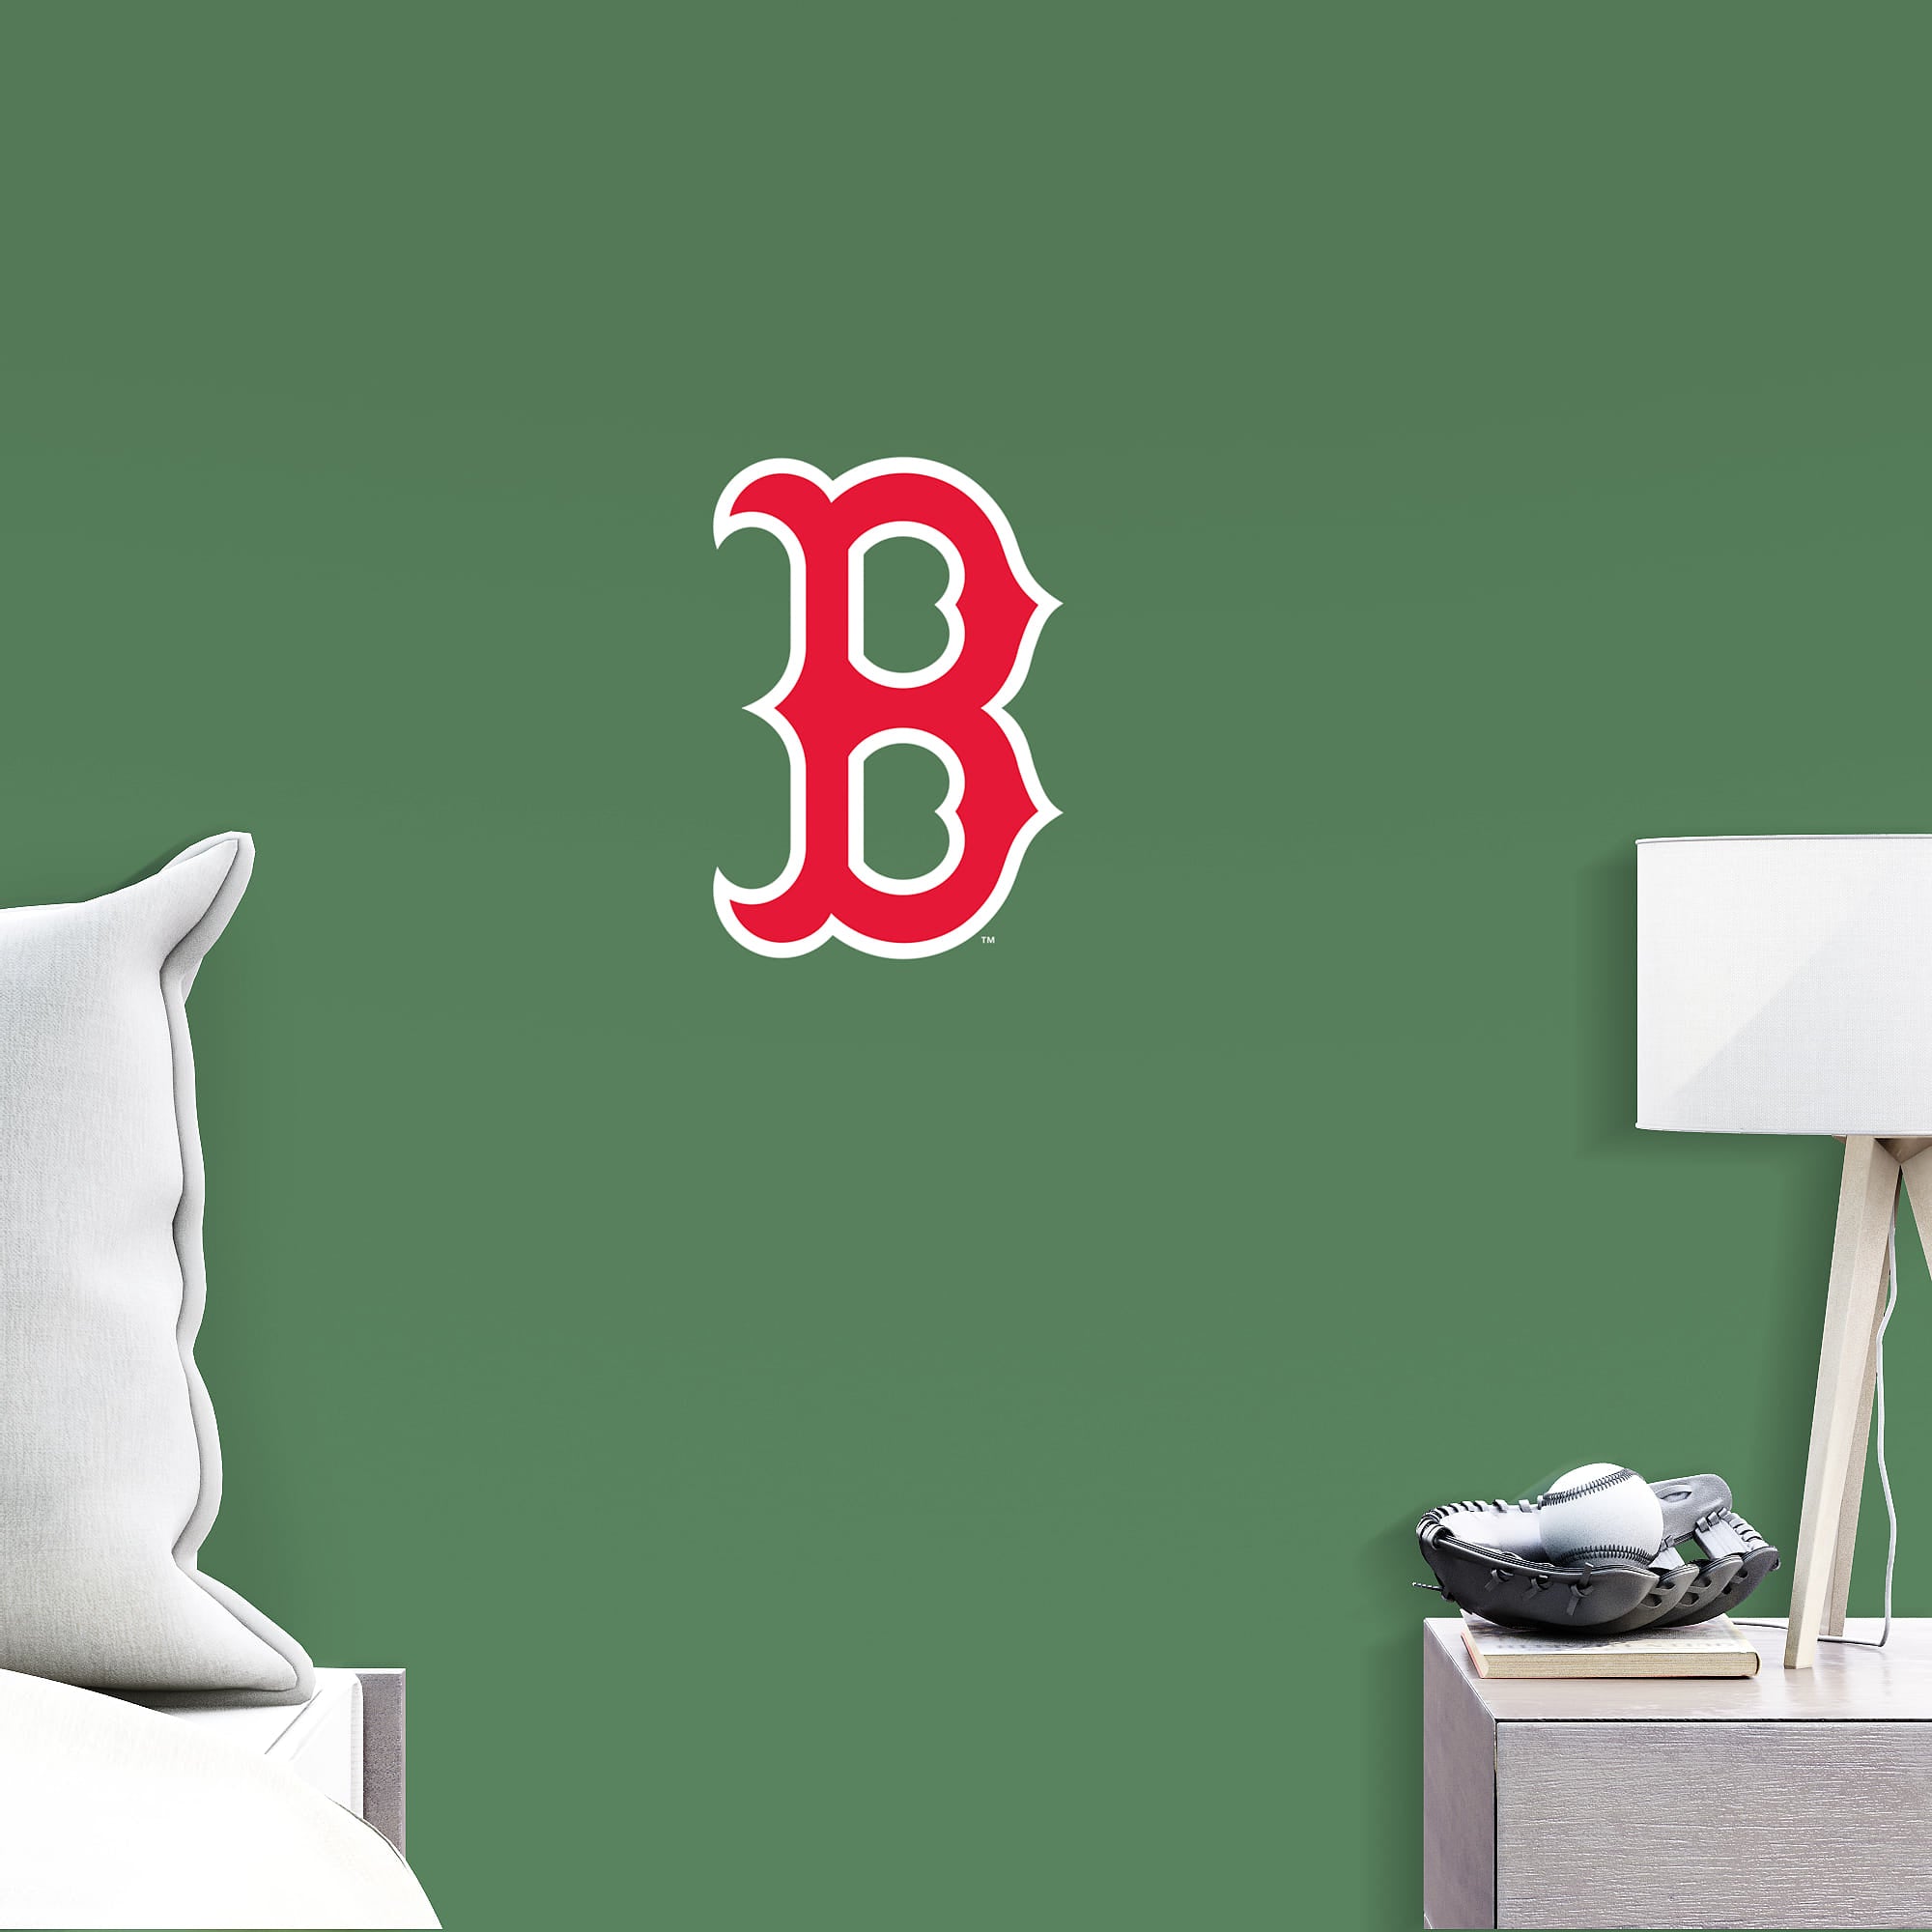 Boston Red Sox: "B" Logo - Officially Licensed MLB Removable Wall Decal Large by Fathead | Vinyl